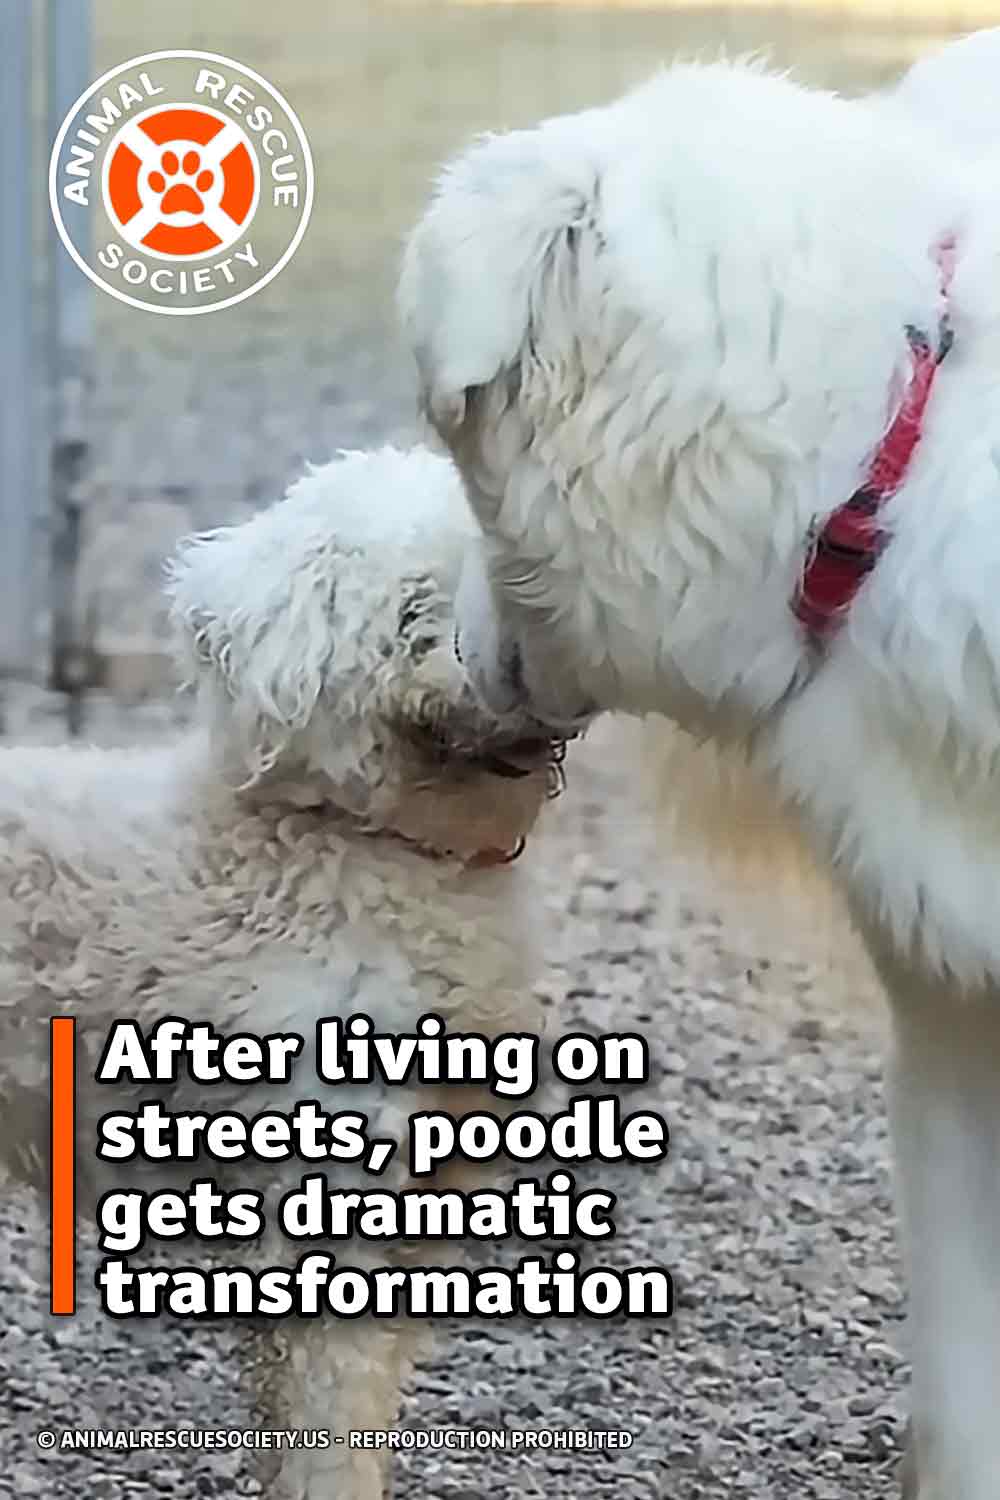 After living on streets, poodle gets dramatic transformation